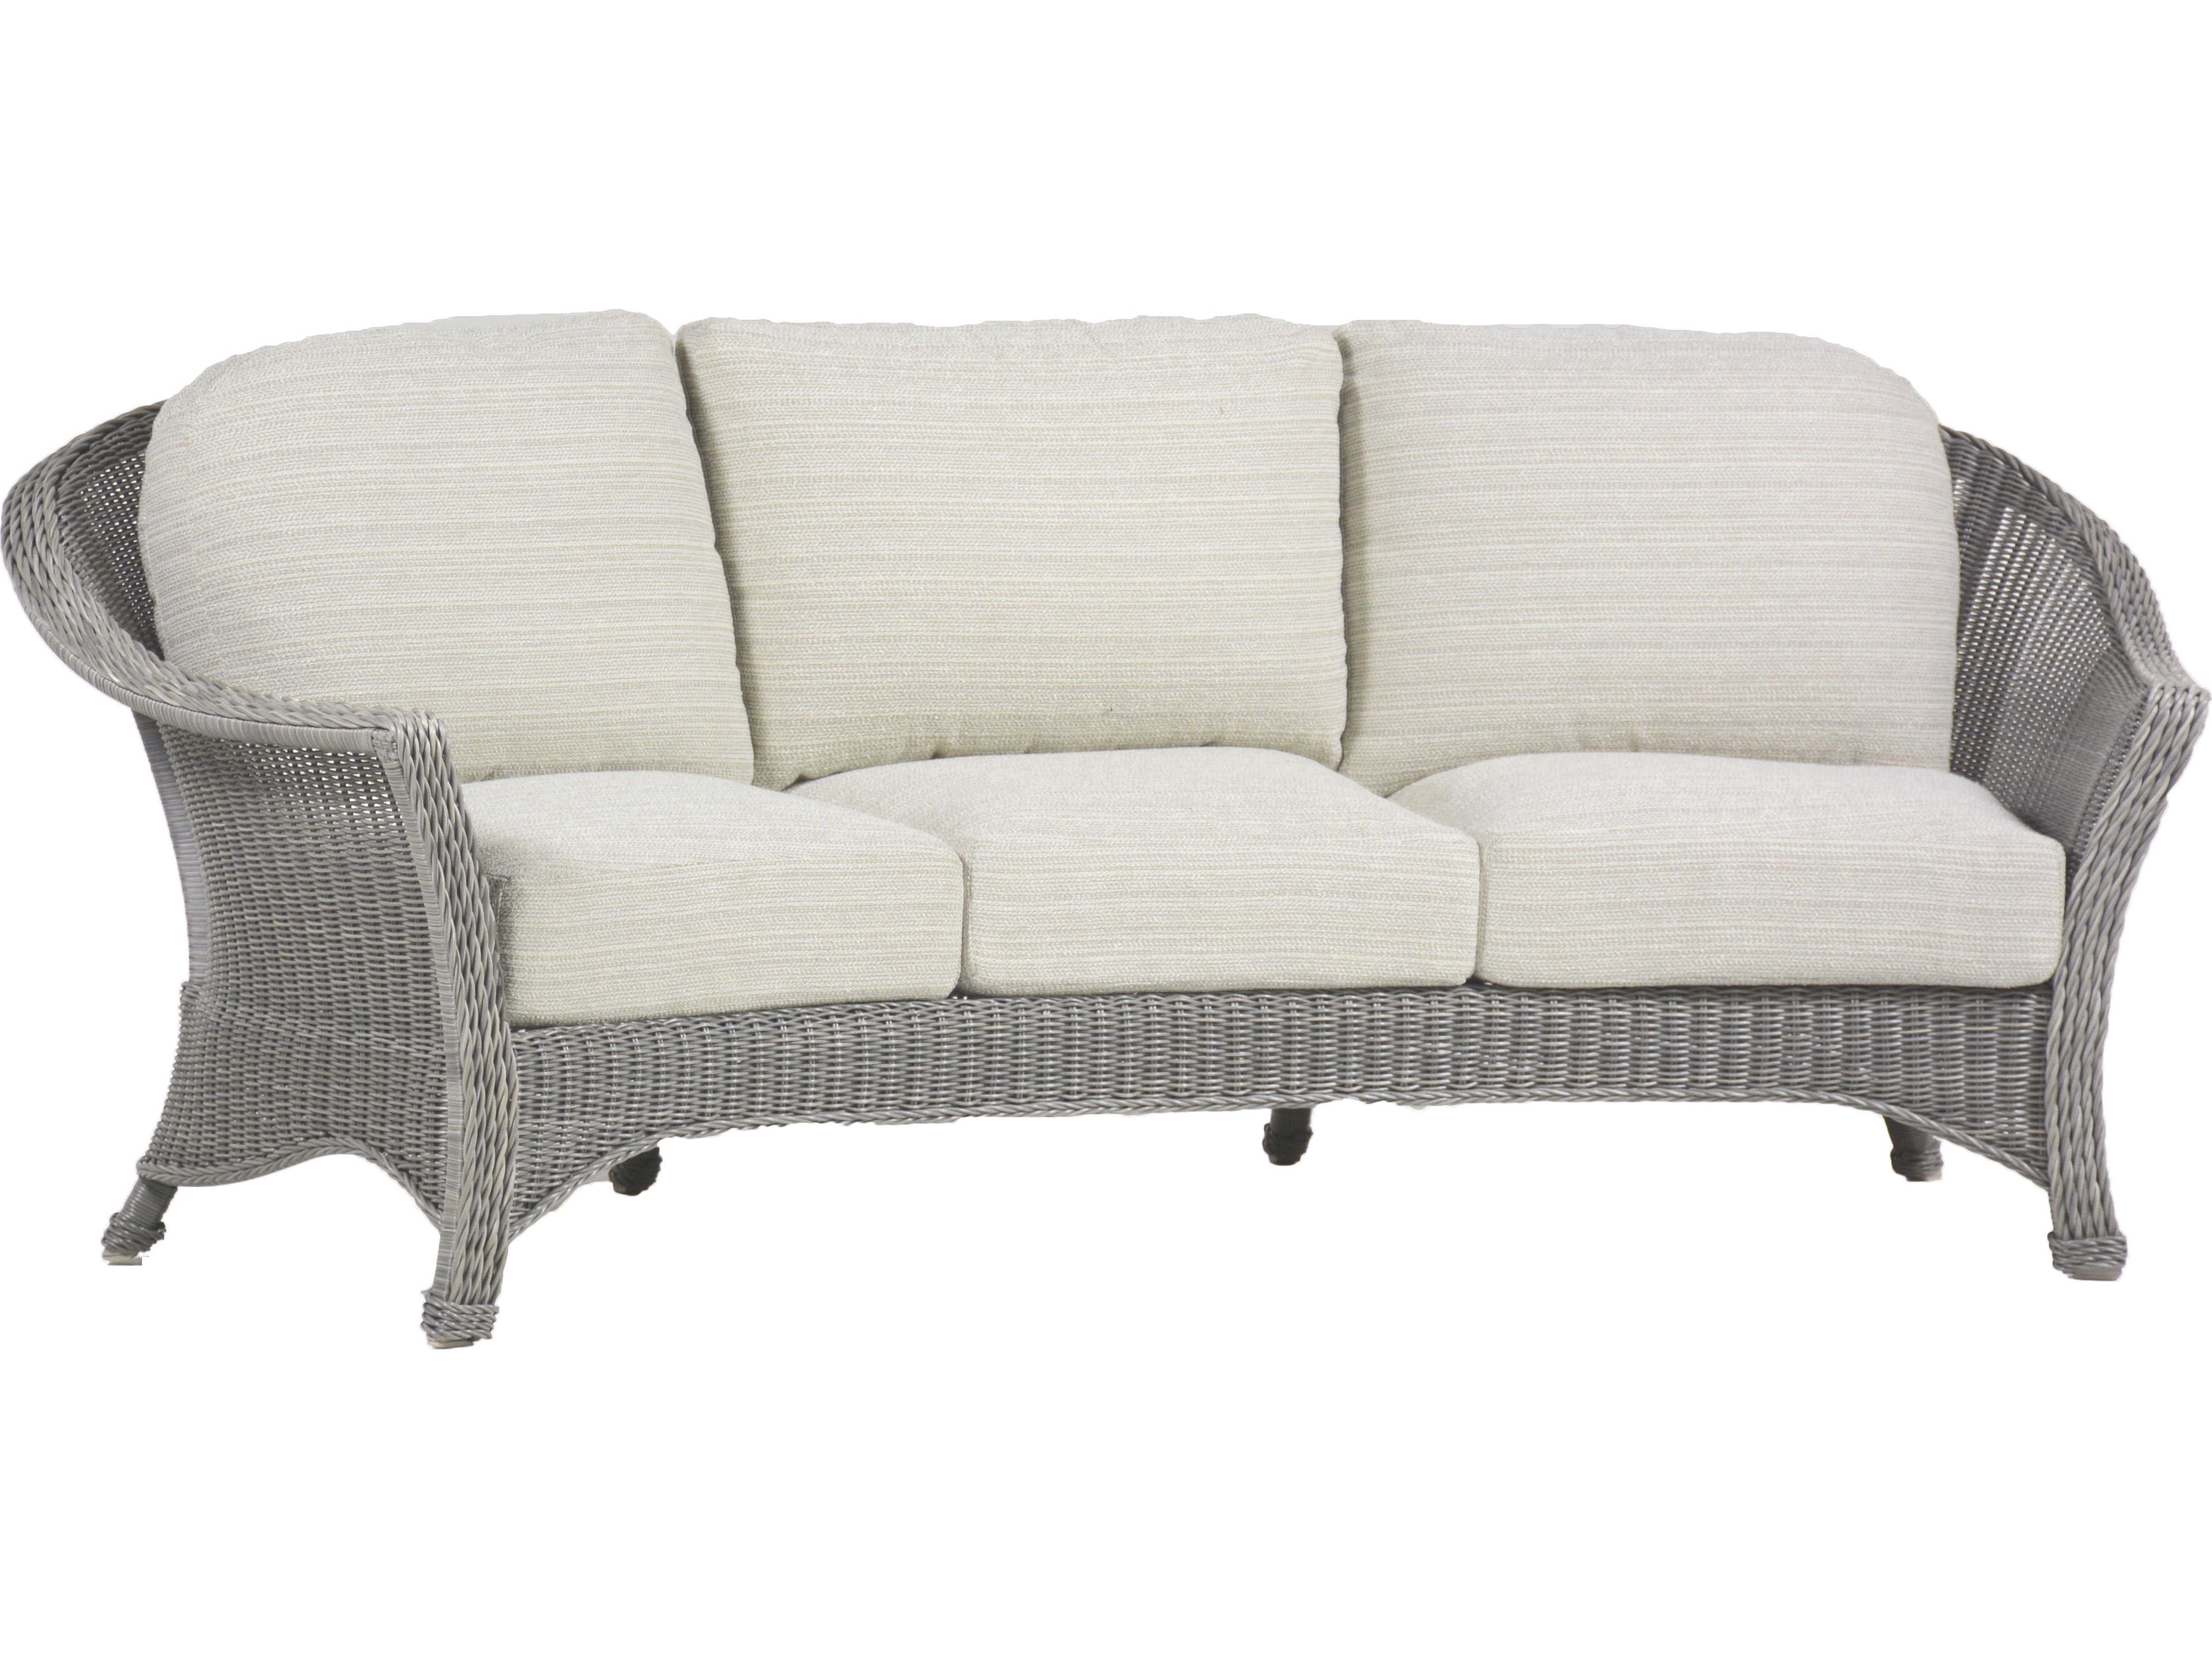 flores oyster sofa bed